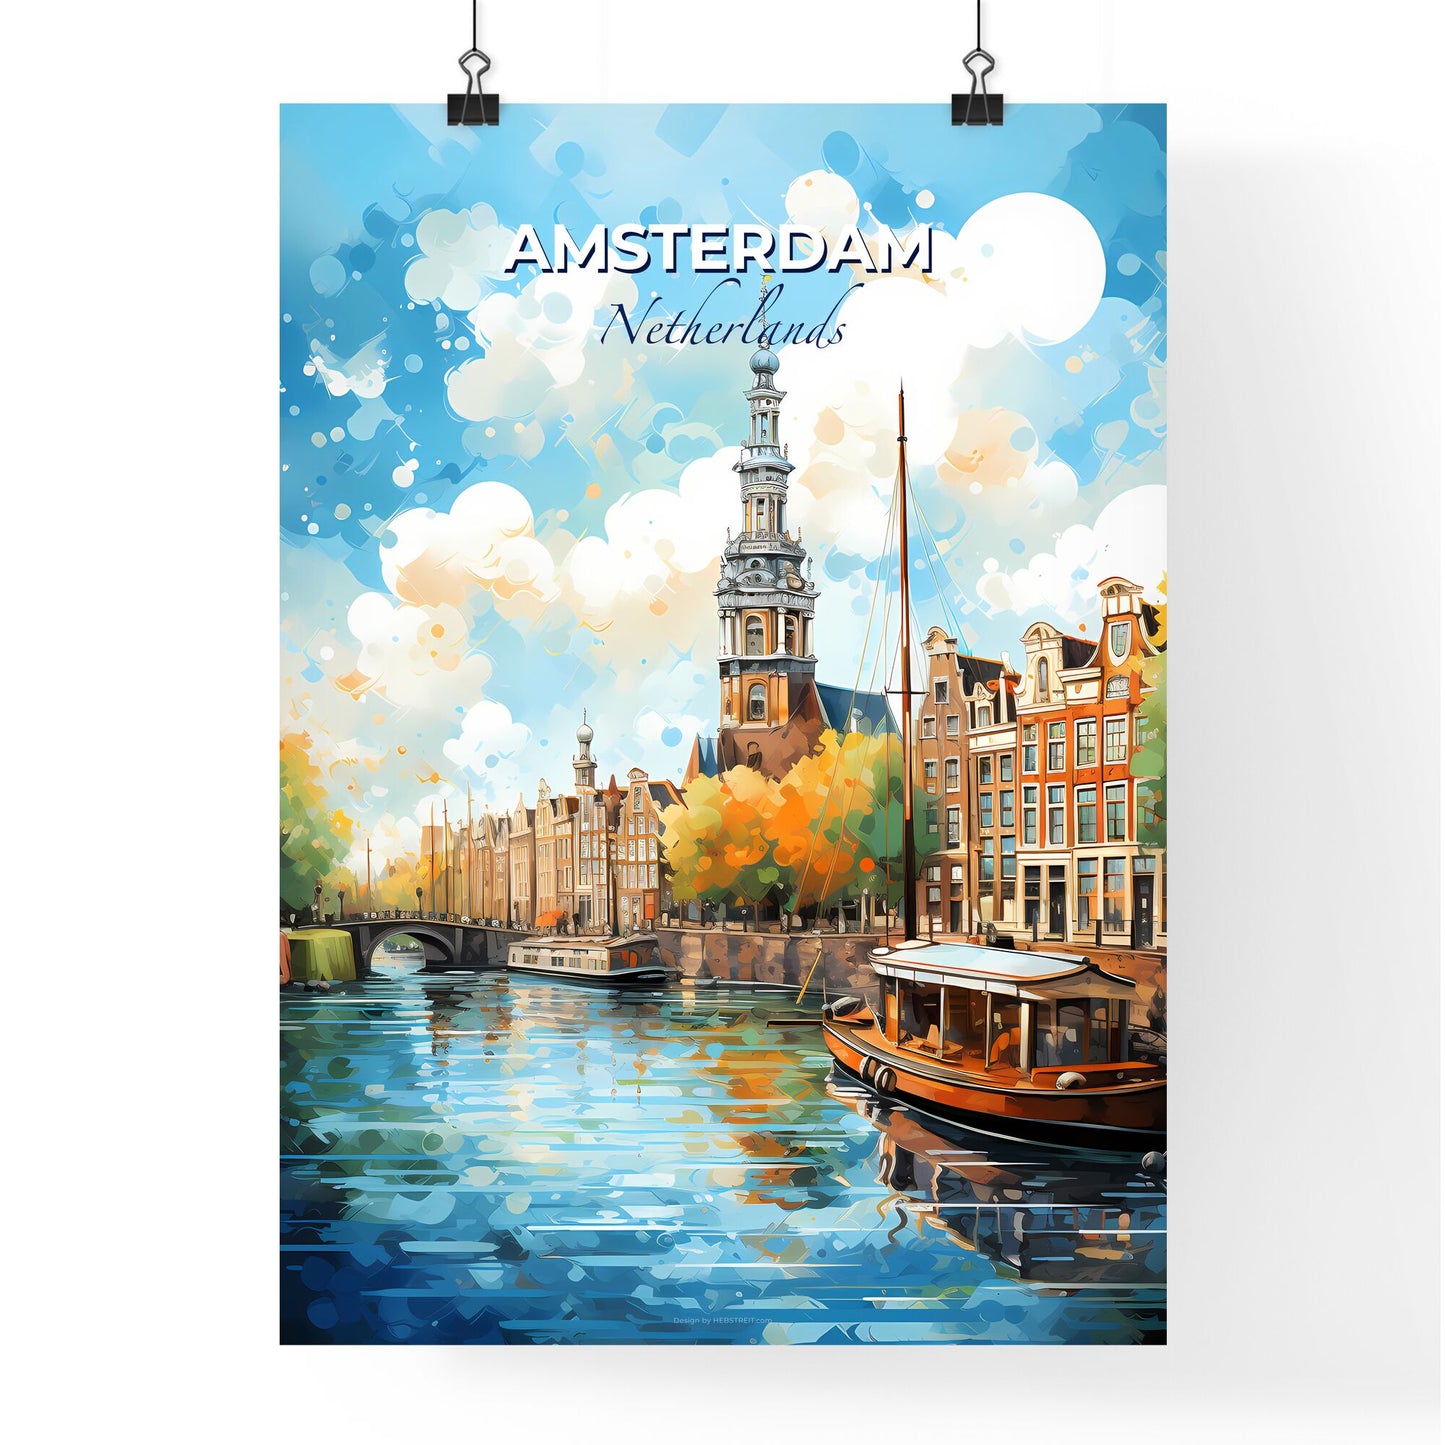 Amsterdam Netherlands Skyline - A Water Canal With Boats And A Tower - Customizable Travel Gift Default Title